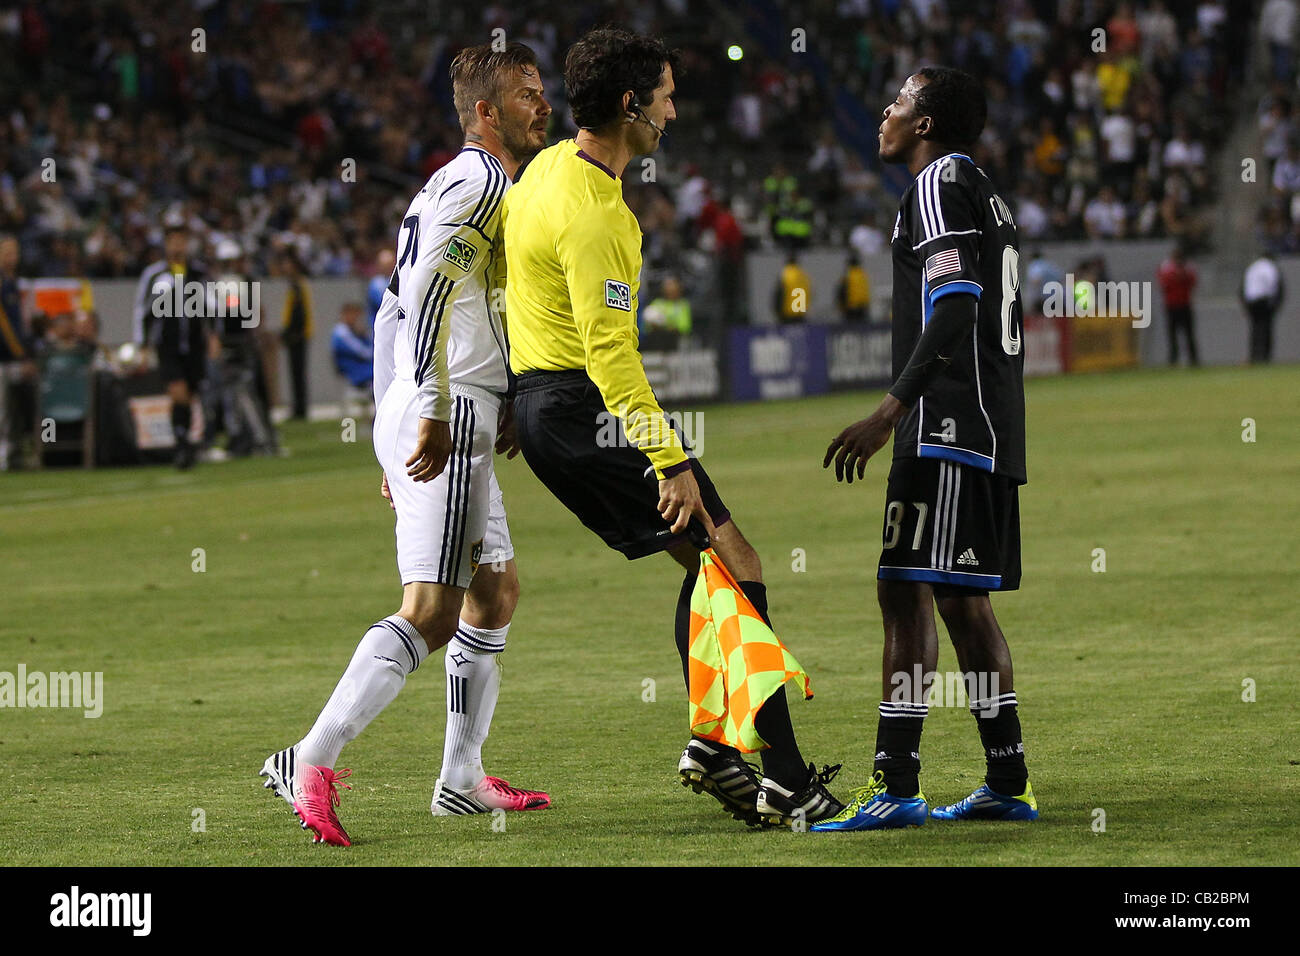 May 23, 2012 - Carson, California, United States of America - The referee rushes in to break up a fight between David Beckham (23) of Los Angeles Galaxy and Marvin Chavez (81) of San Jose Earthquakes in the second half during the Los Angeles Galaxy vs San Jose Earthquakes game at the Home Depot Cent Stock Photo